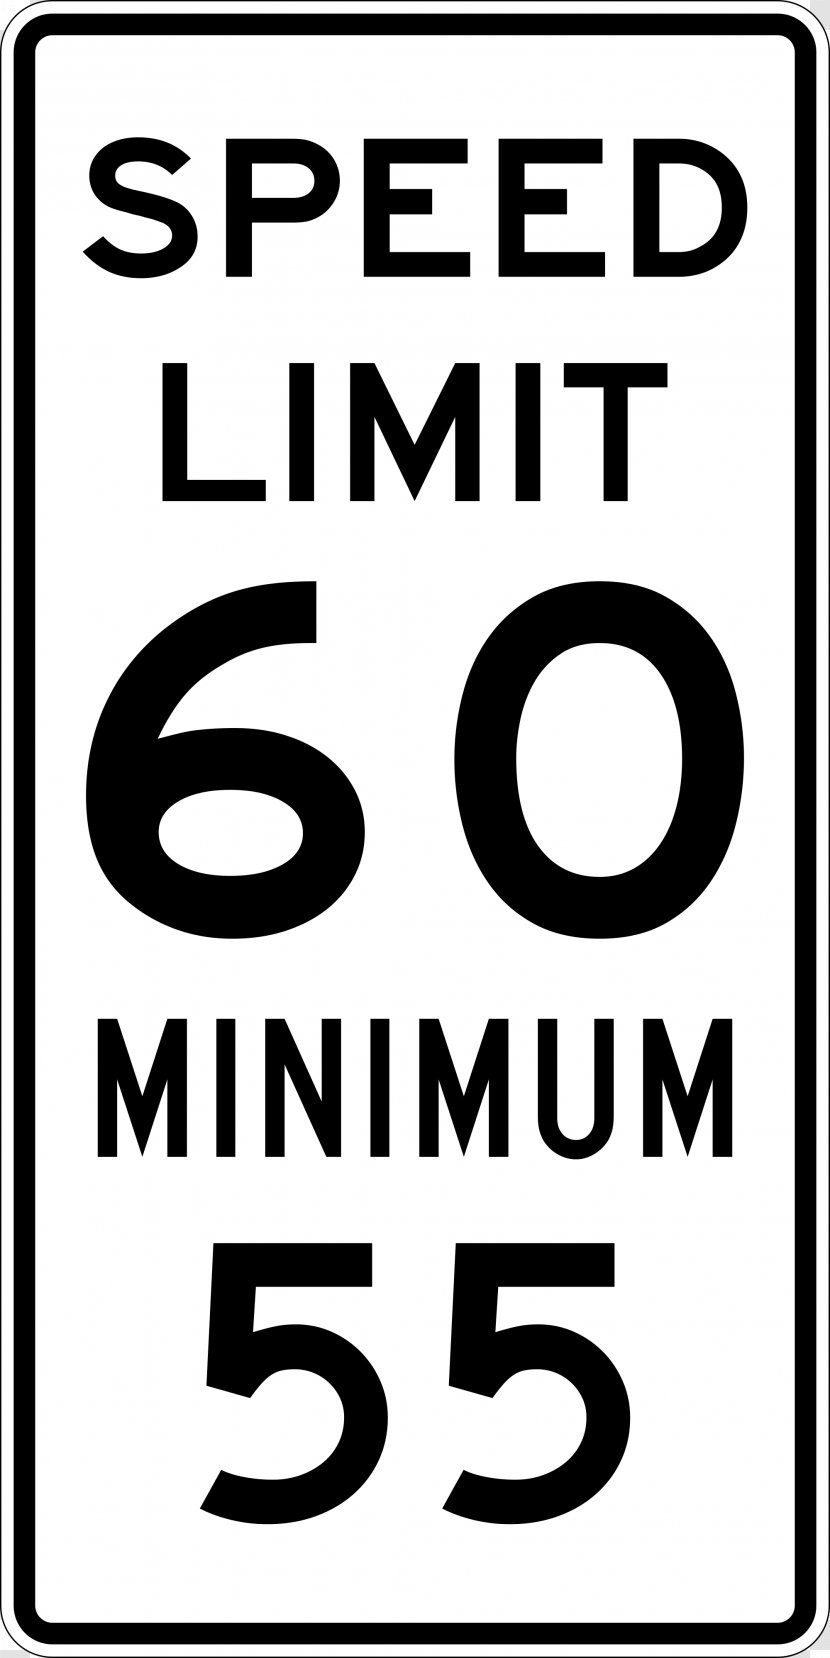 Car Speed Limit Traffic Sign Road Driving - Manual On Uniform Control Devices Transparent PNG